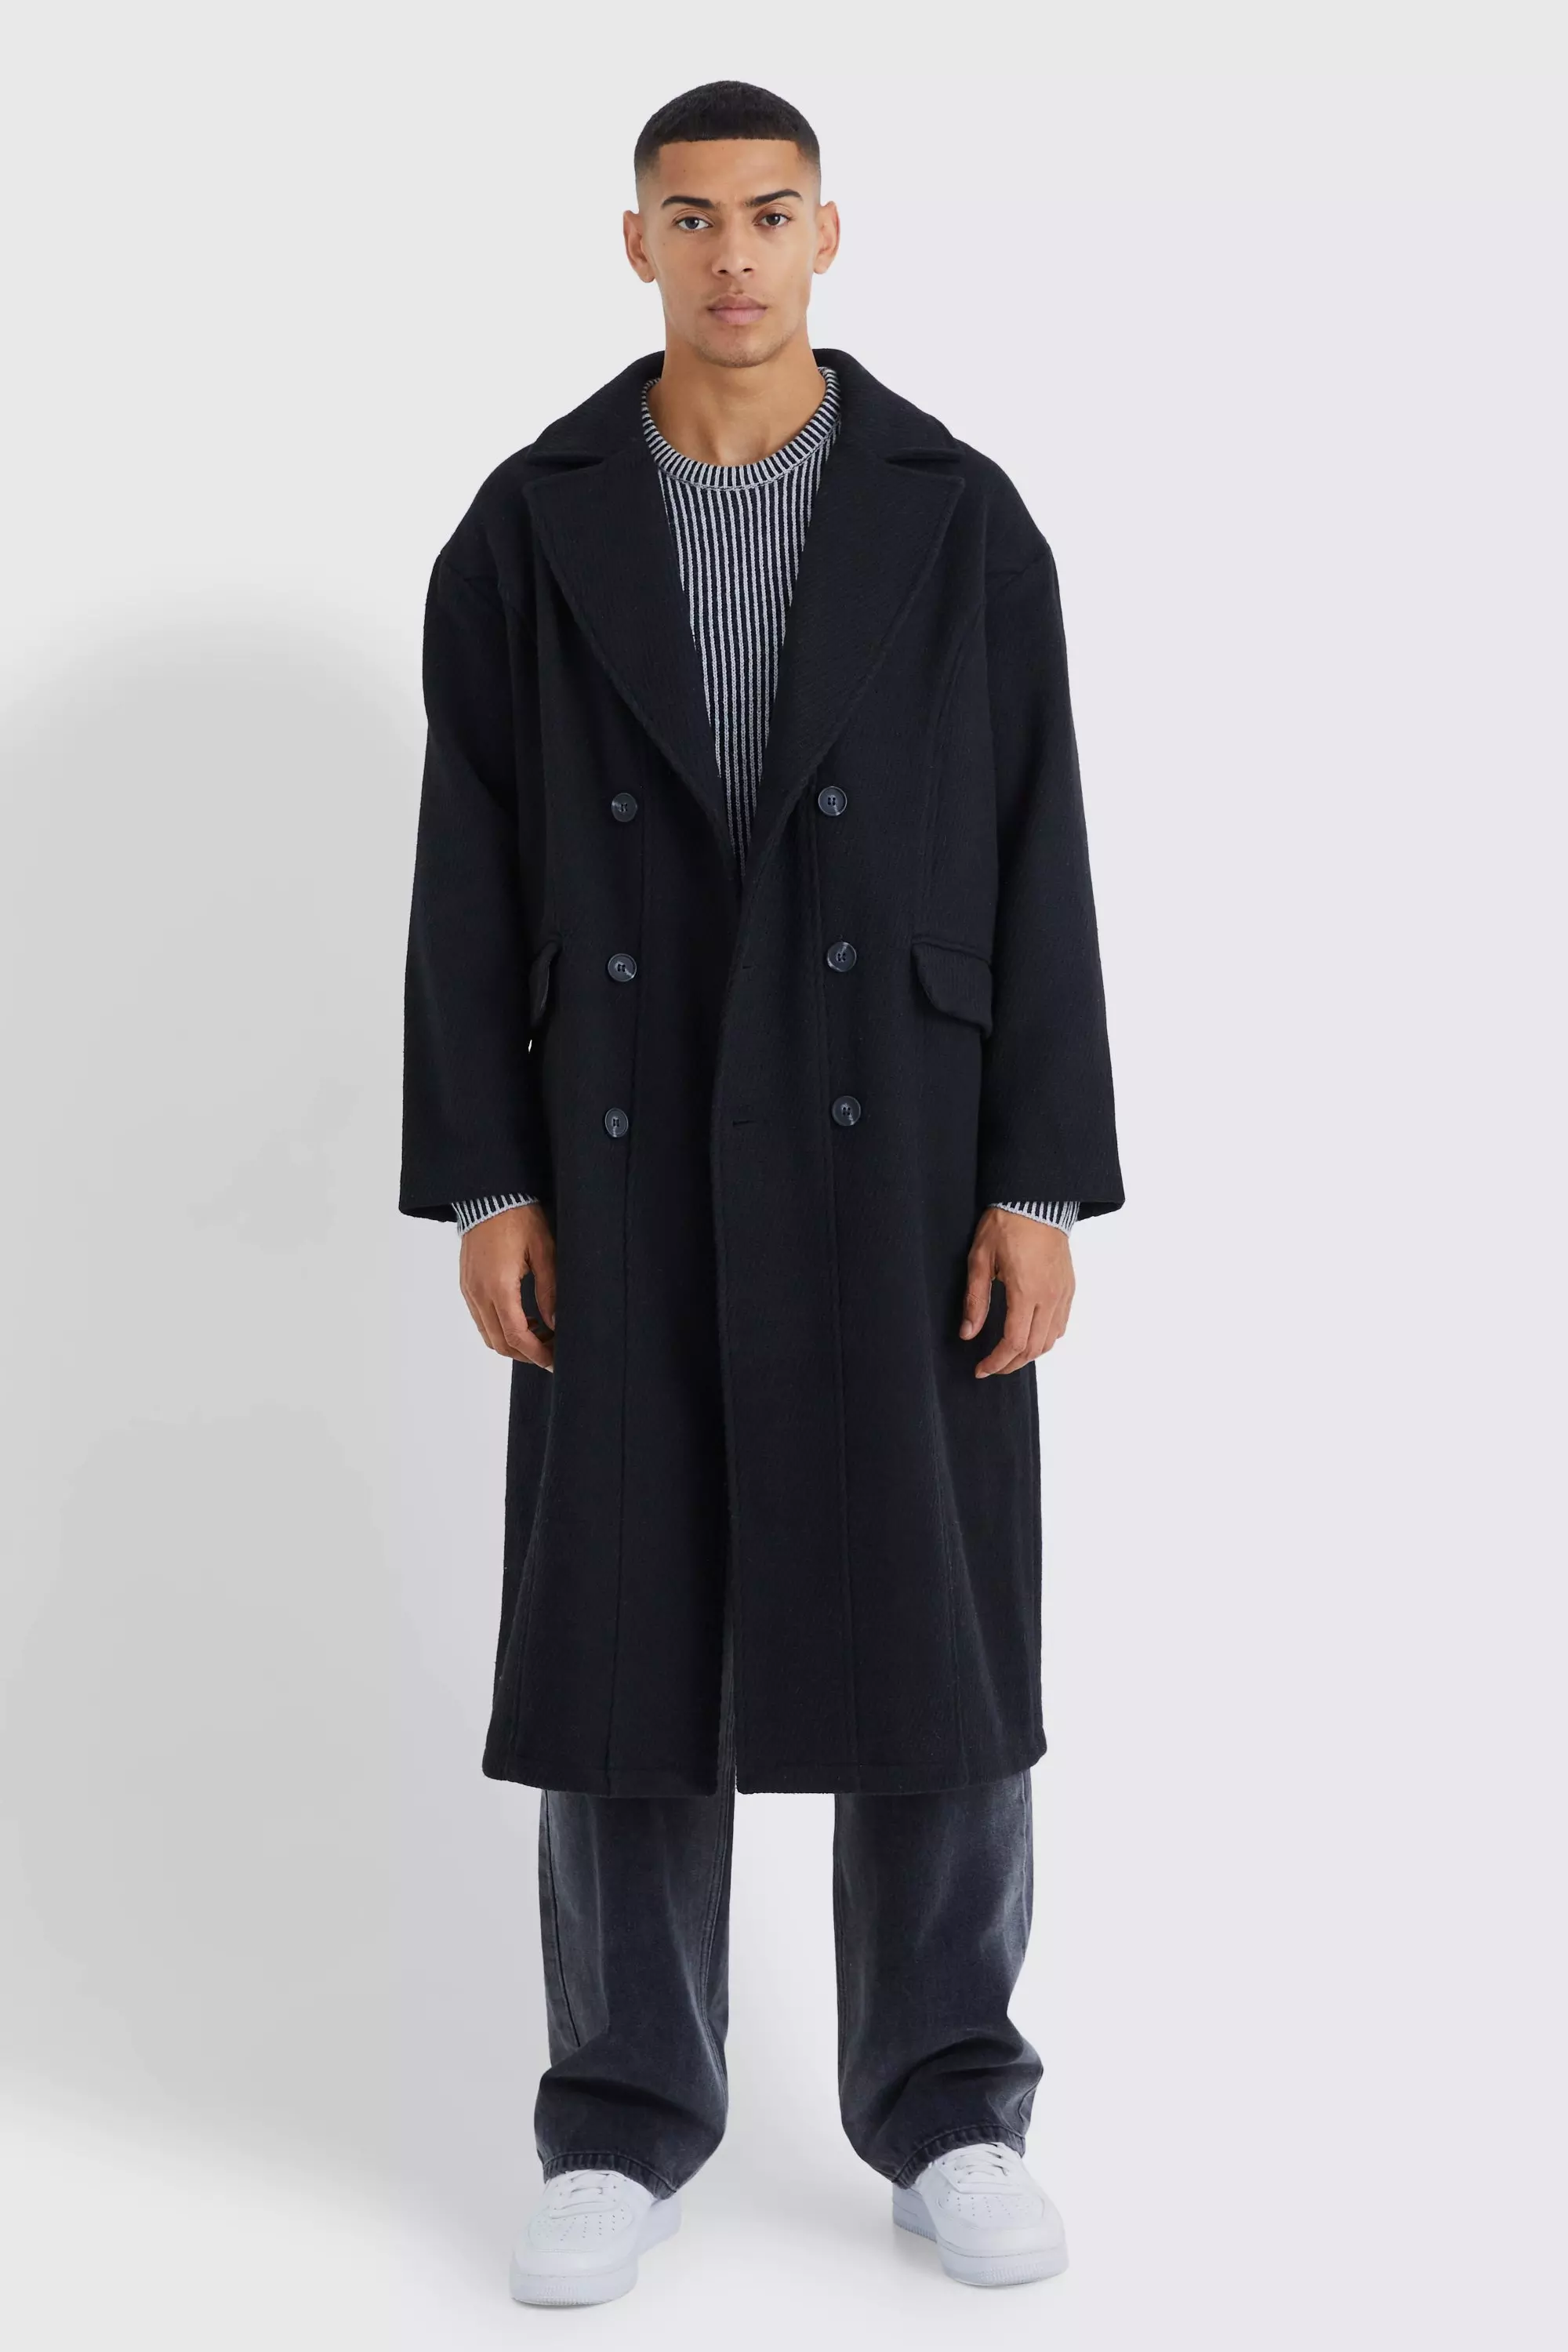 Wool Look Double Breasted Textured Overcoat Black